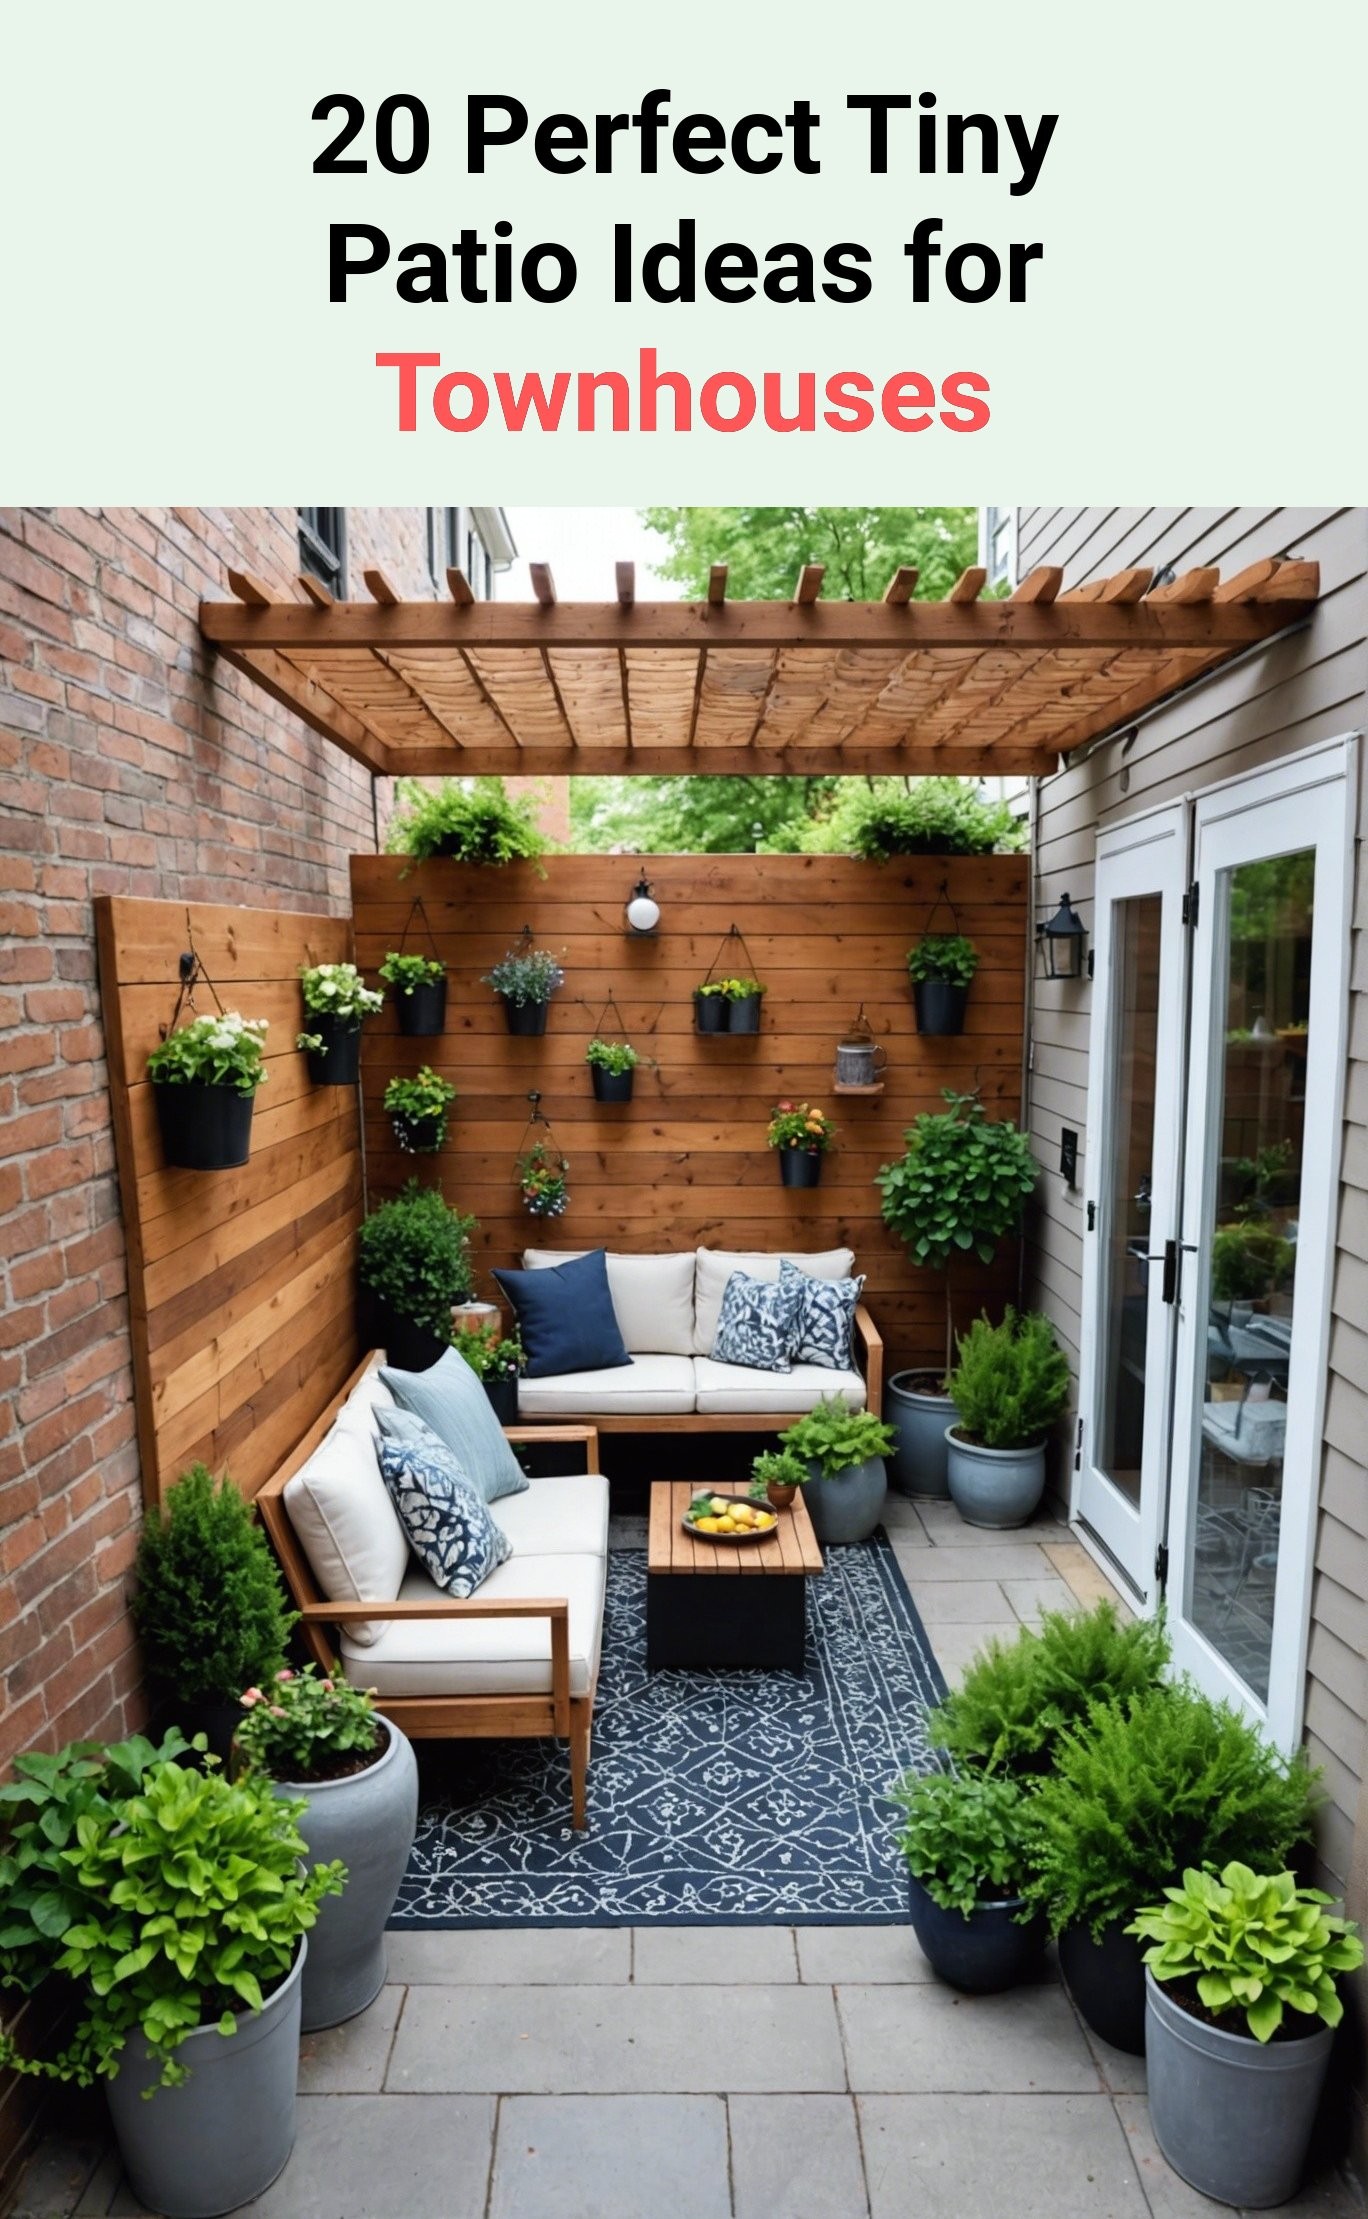 20 Perfect Tiny Patio Ideas for Townhouses